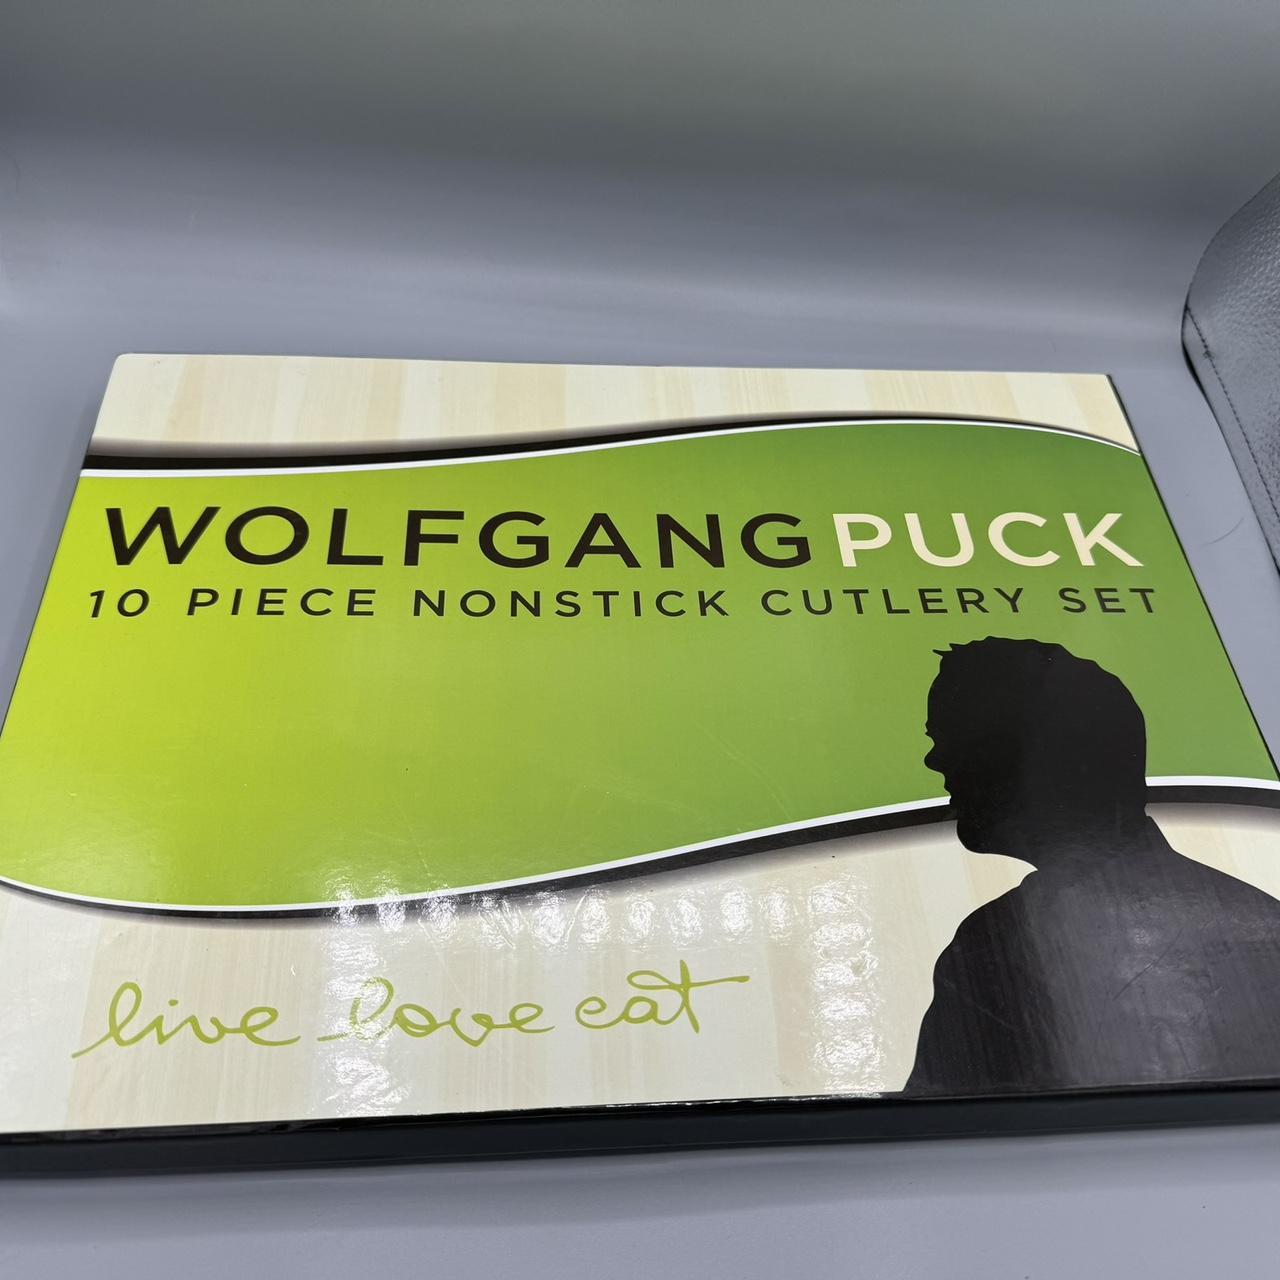 Wolfgang Puck Colorful Nonstick Cutlery Set 